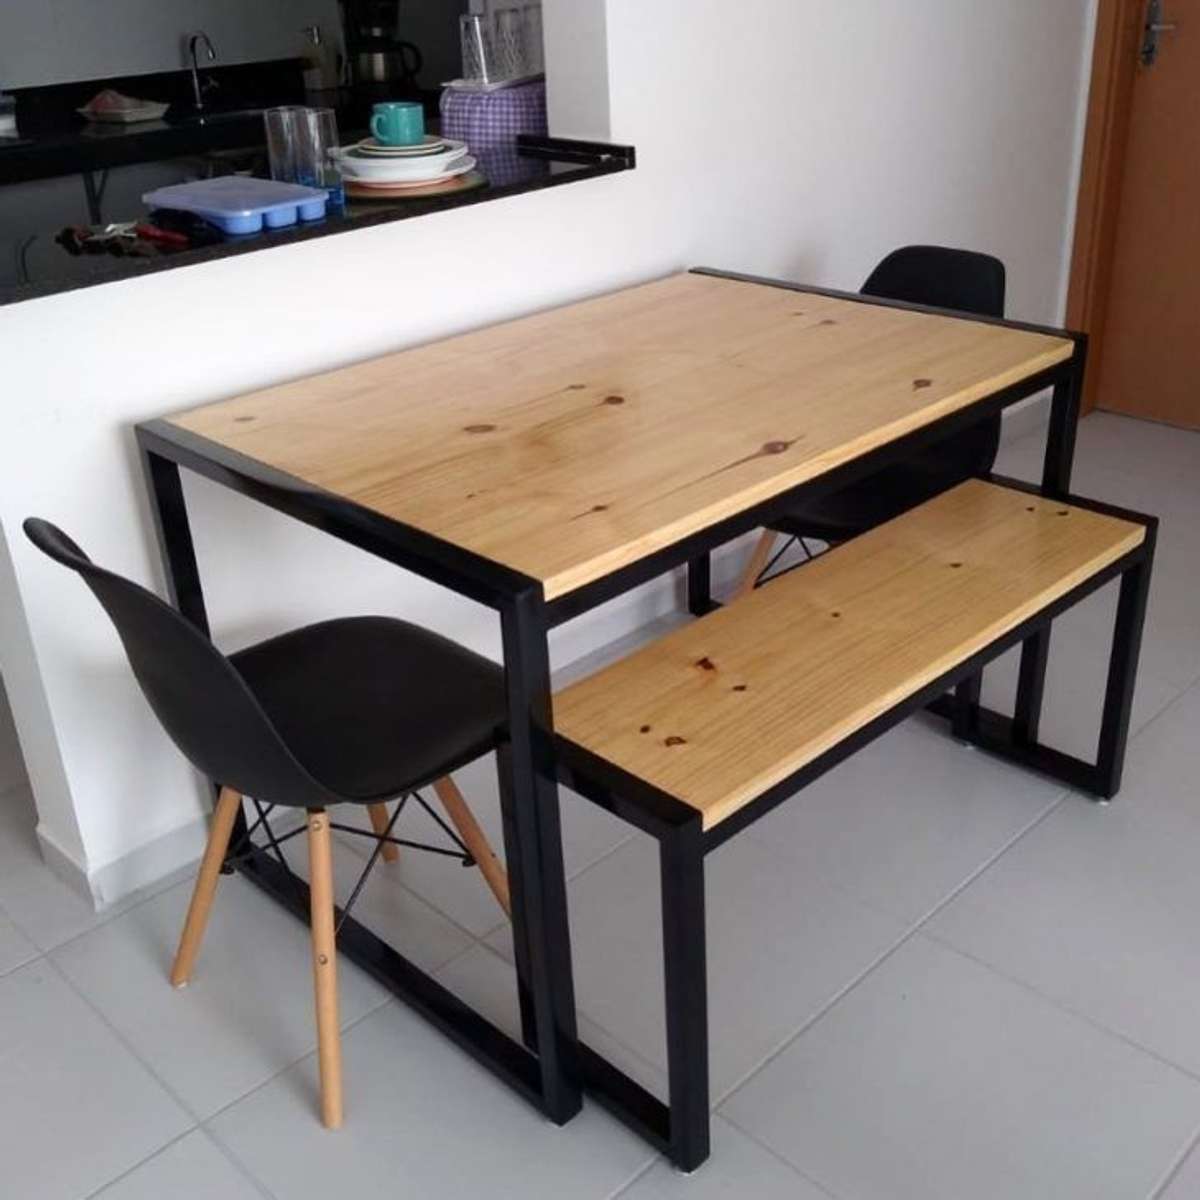 #DINING_TABLE #BENCHS
10000/-